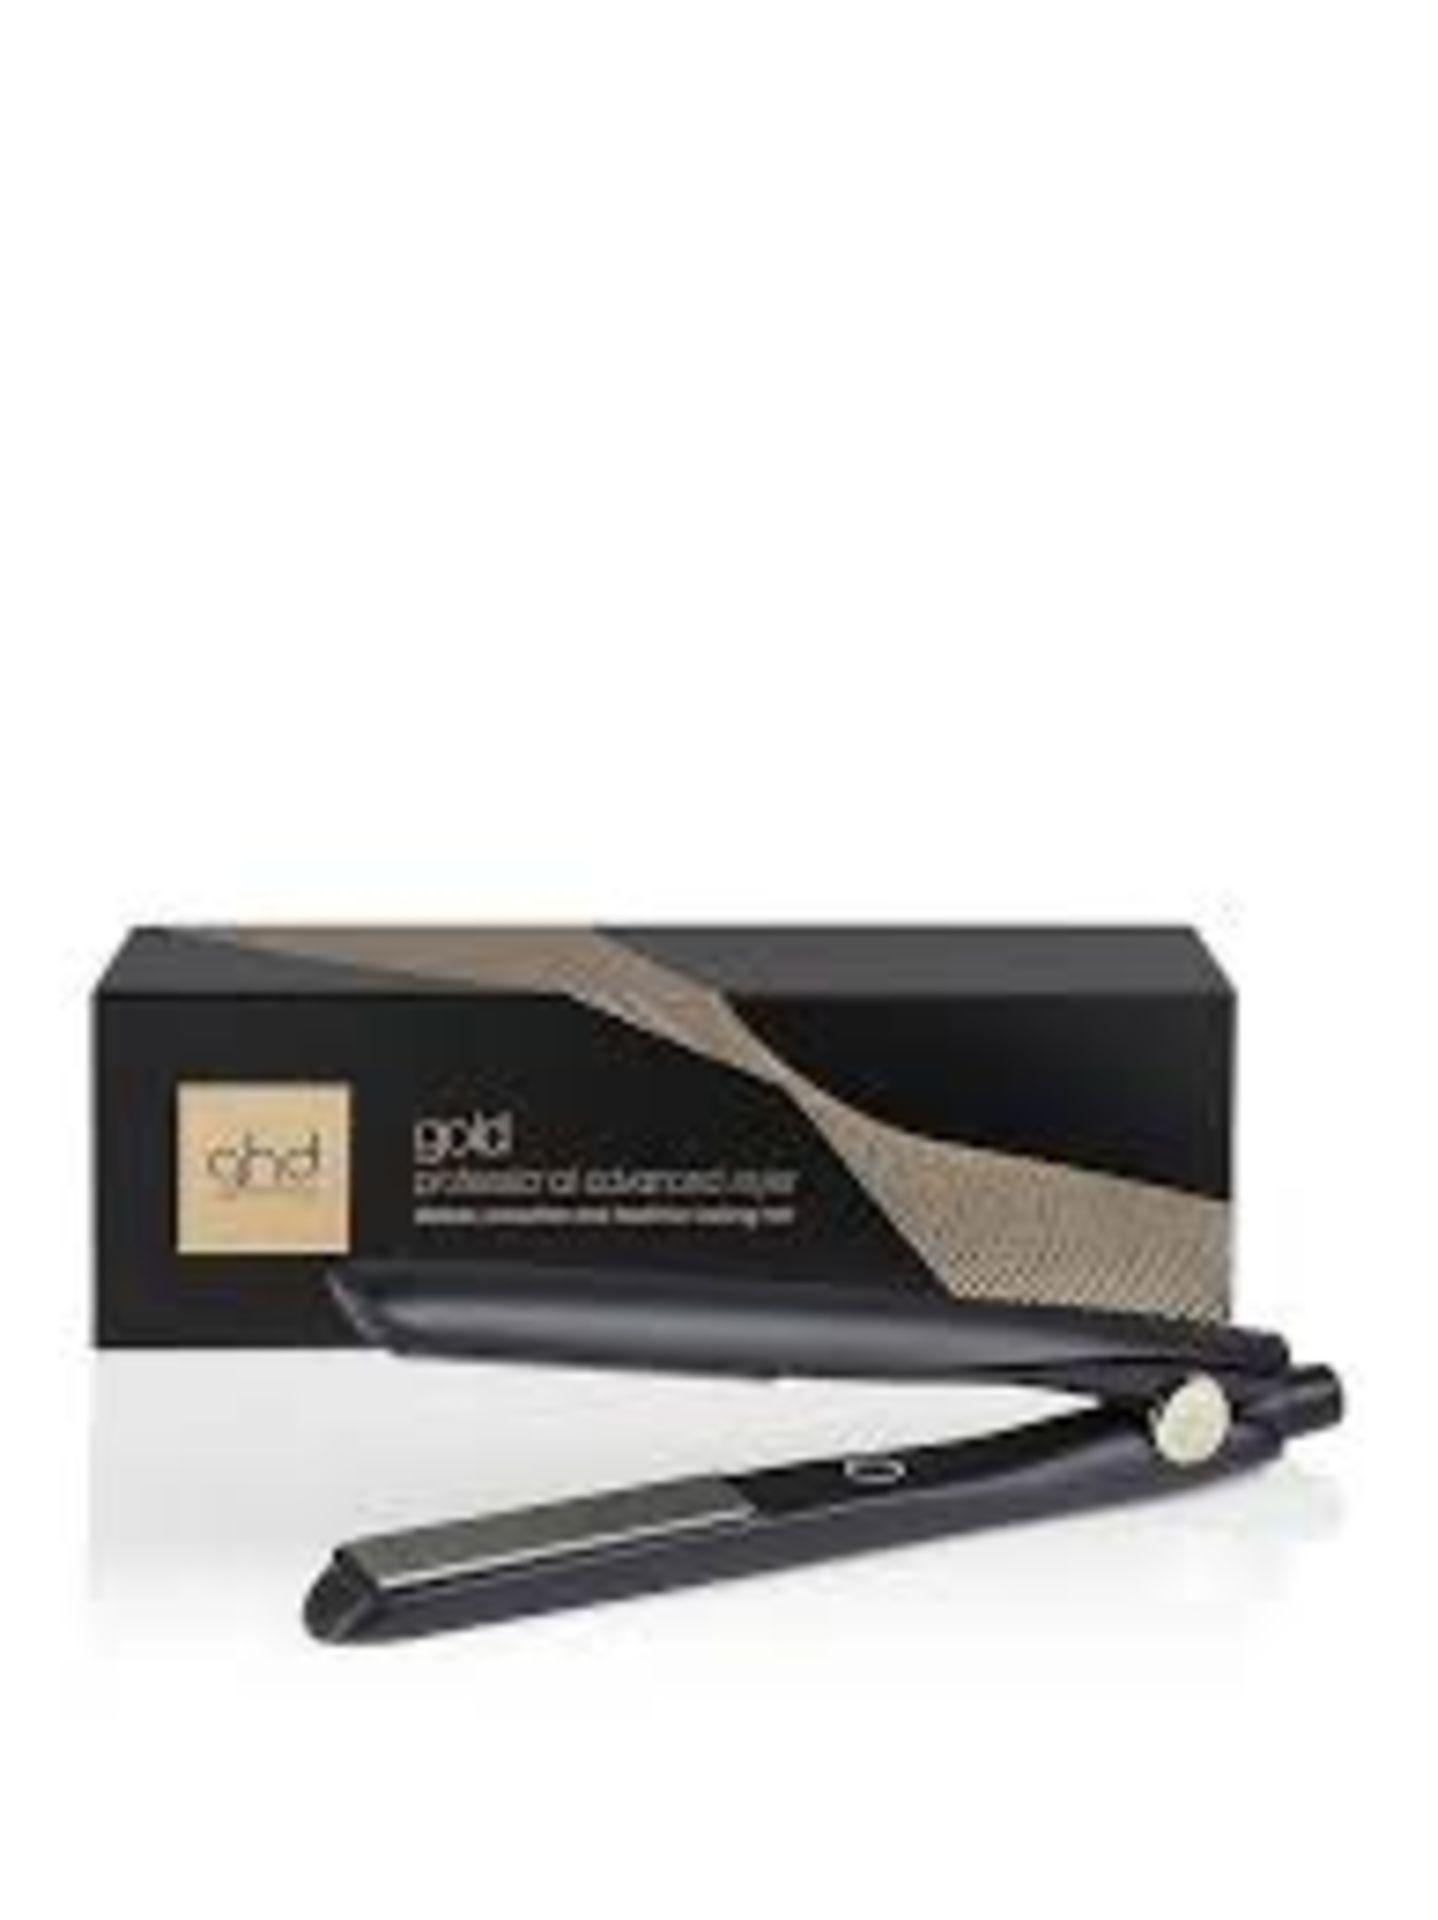 ghd Gold Styler Professional Hair Straighteners (LOCATION P6)